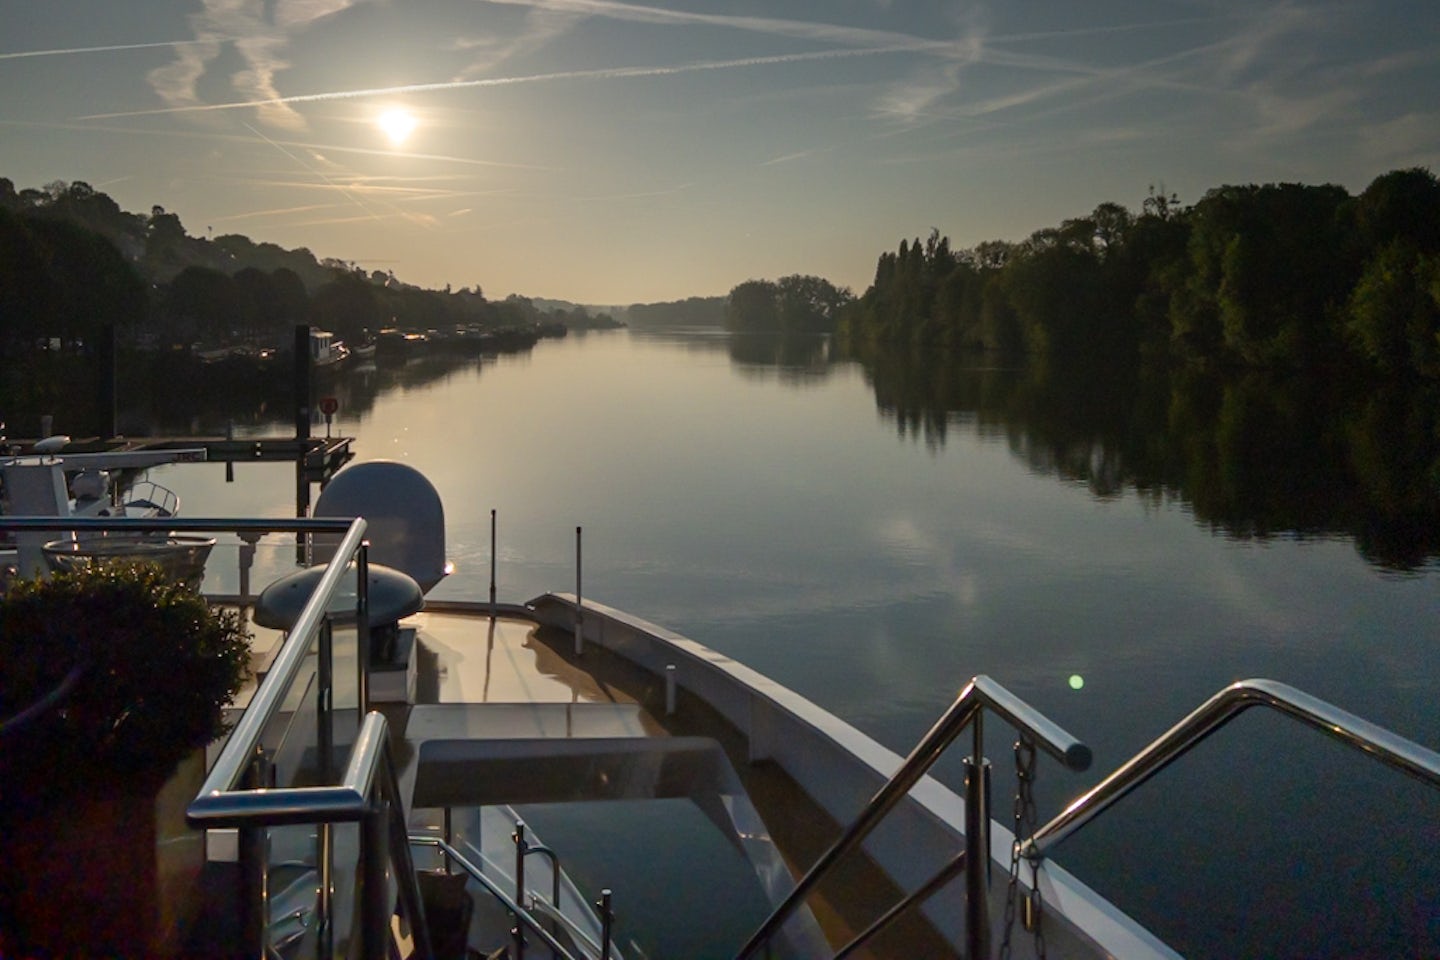 Seine in he early morning at Auvers Sur Oise